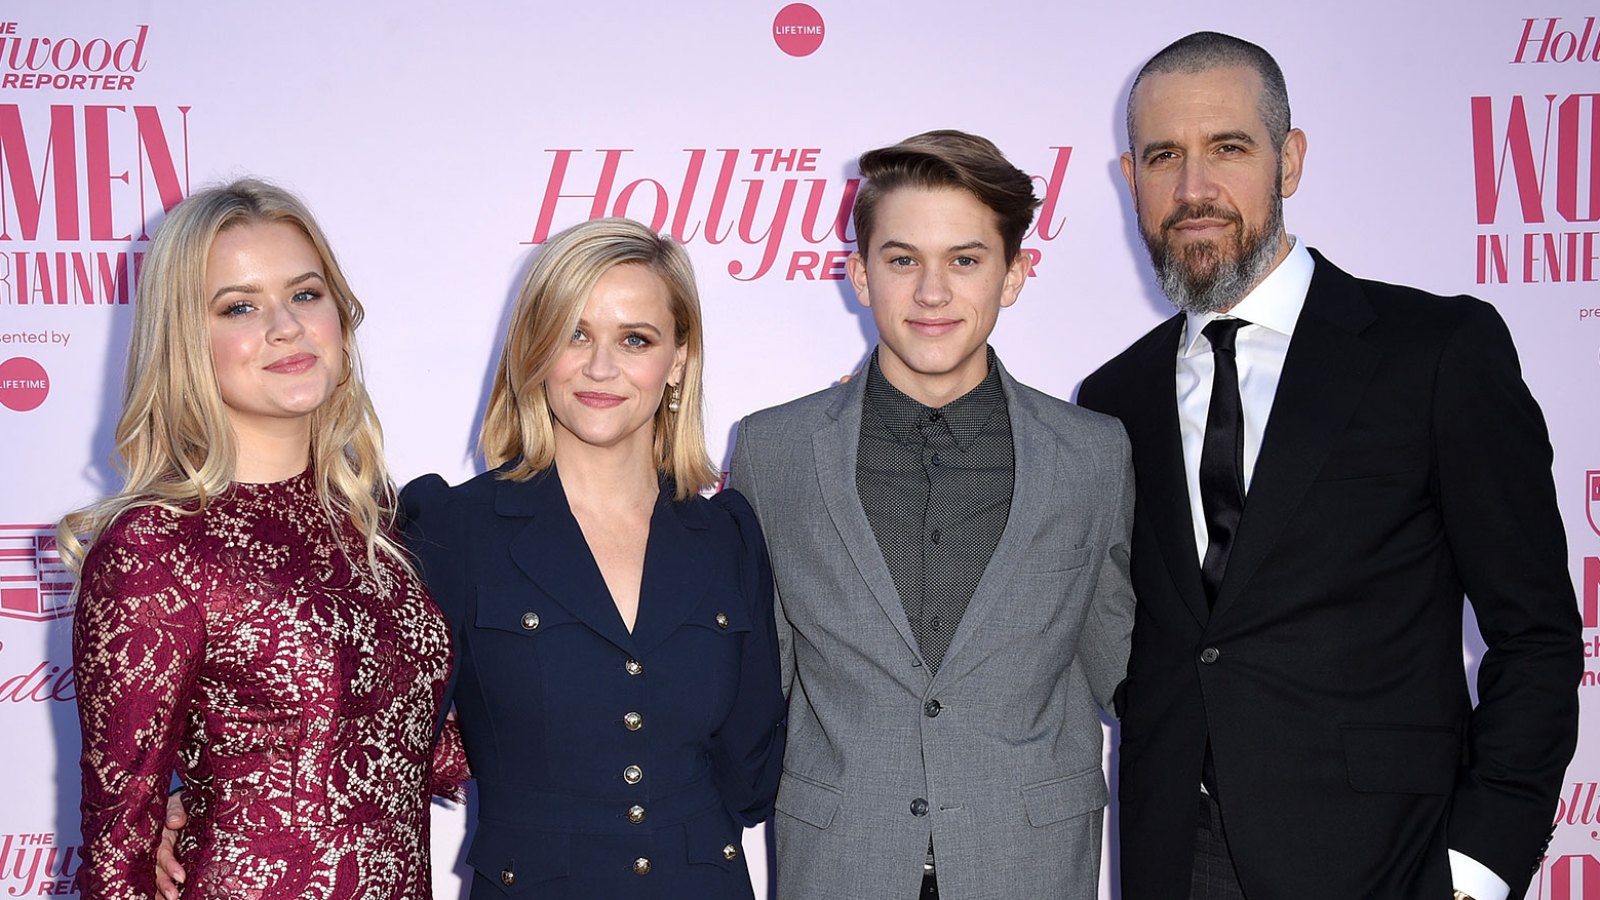 Reese Witherspoon and Jim Toth Recreate 'Sing' Red Carpet Moment With Ava Deacon and Tennessee